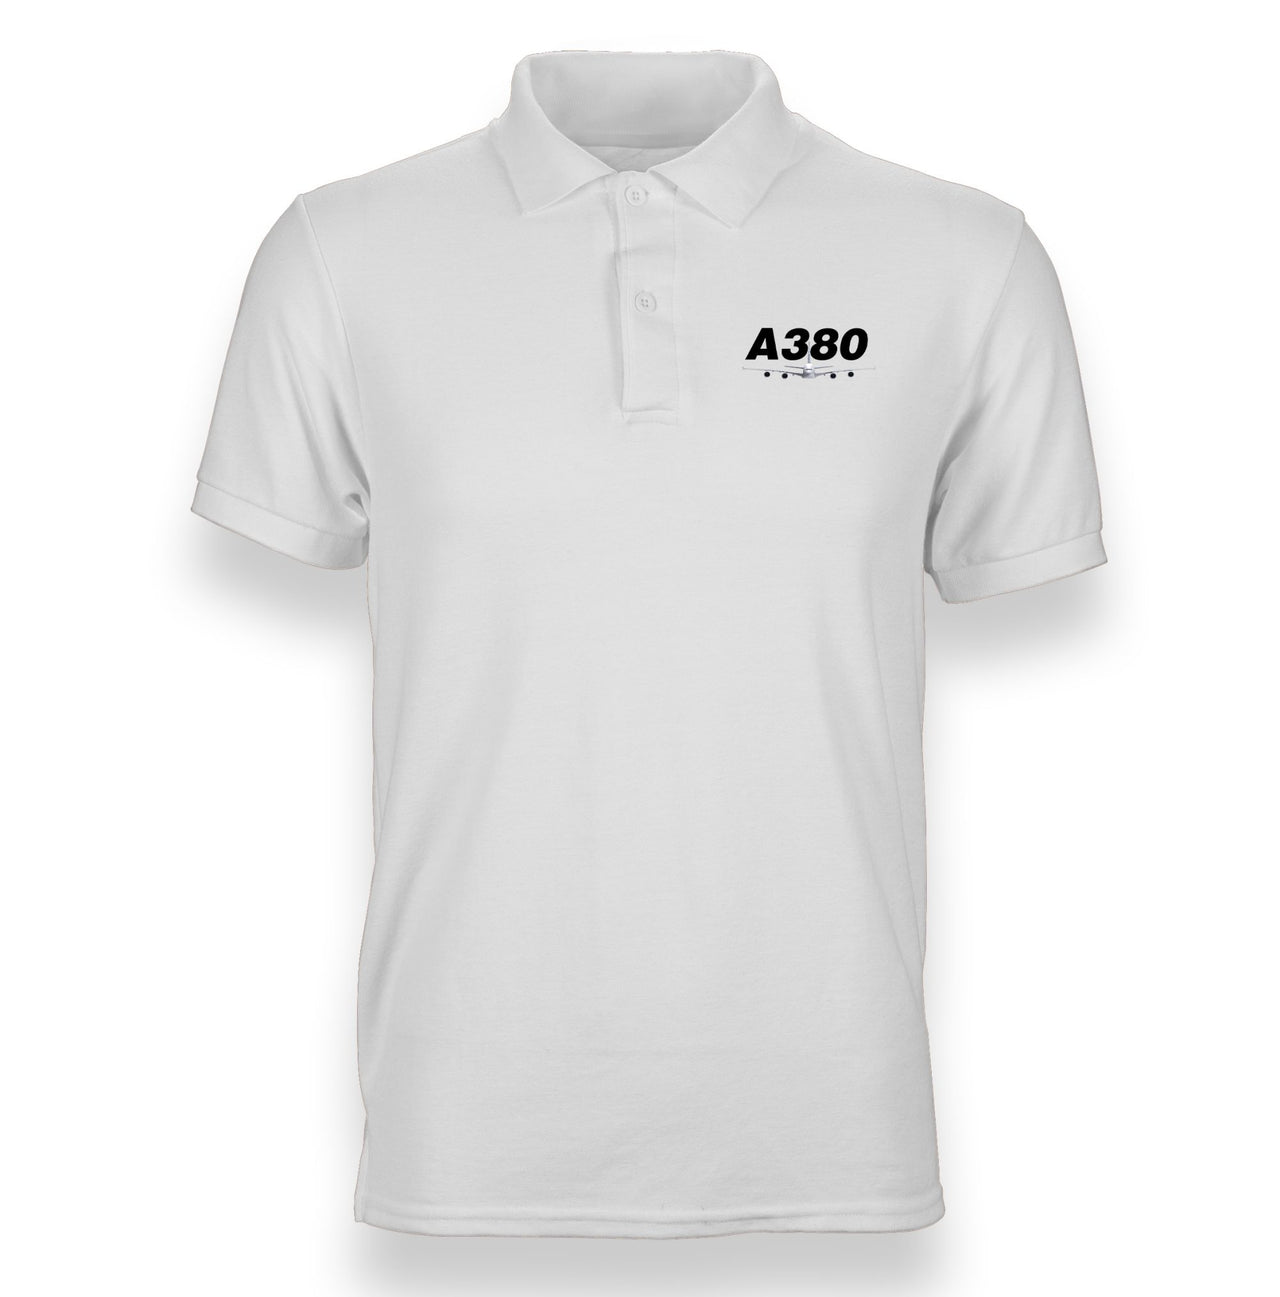 Super Airbus A380 Designed "WOMEN" Polo T-Shirts